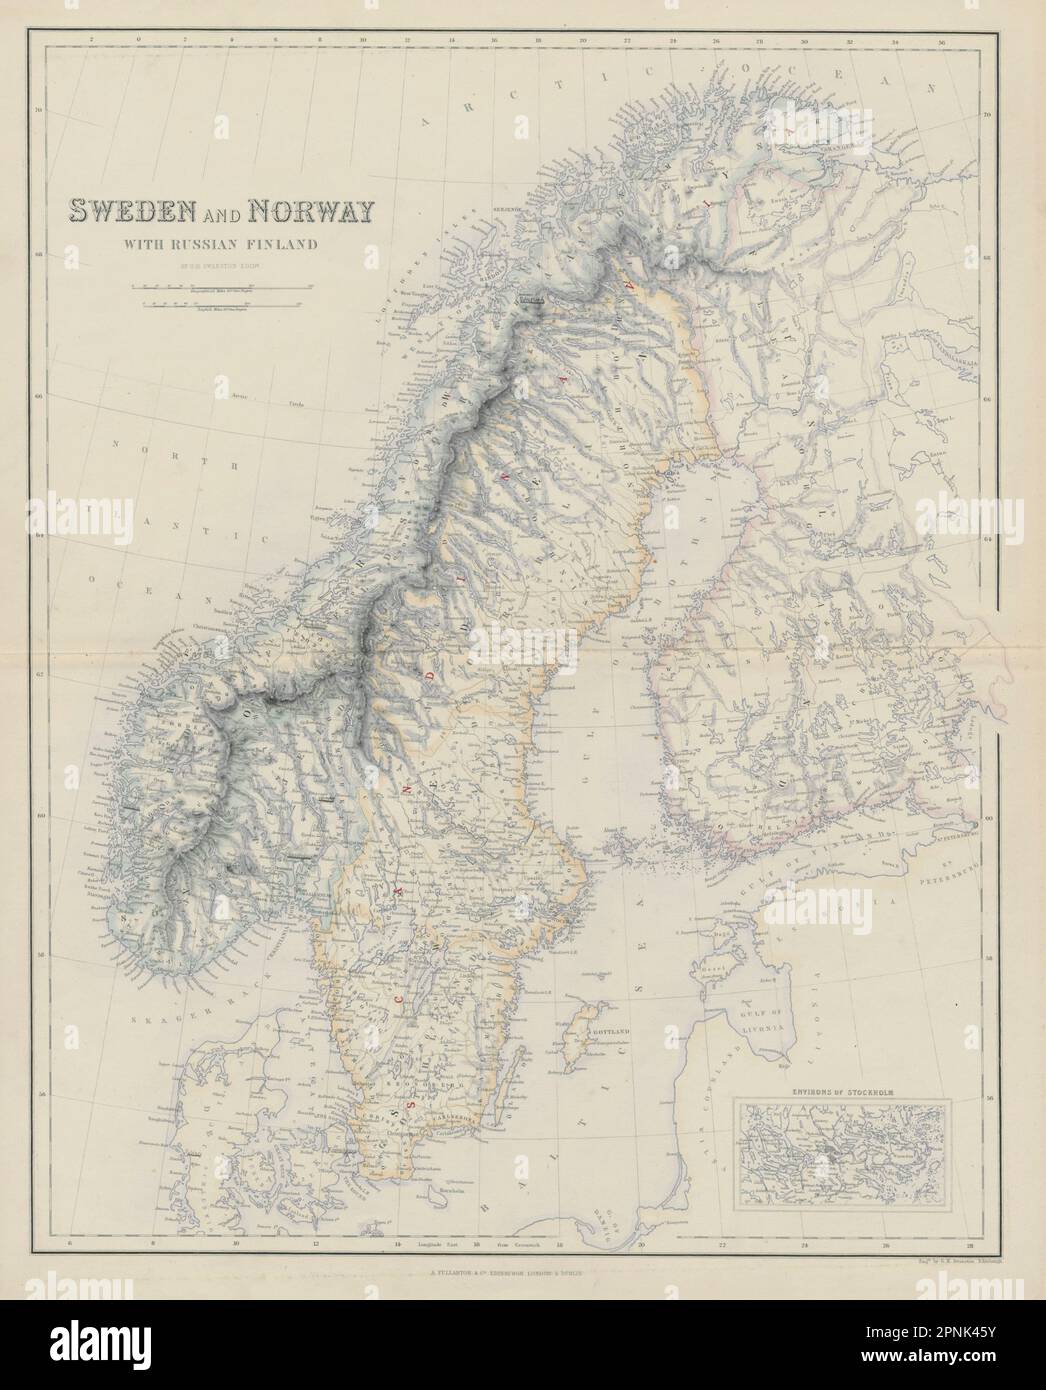 Sweden and Norway with Russian Finland. Scandinavia. SWANSTON 1860 old map Stock Photo